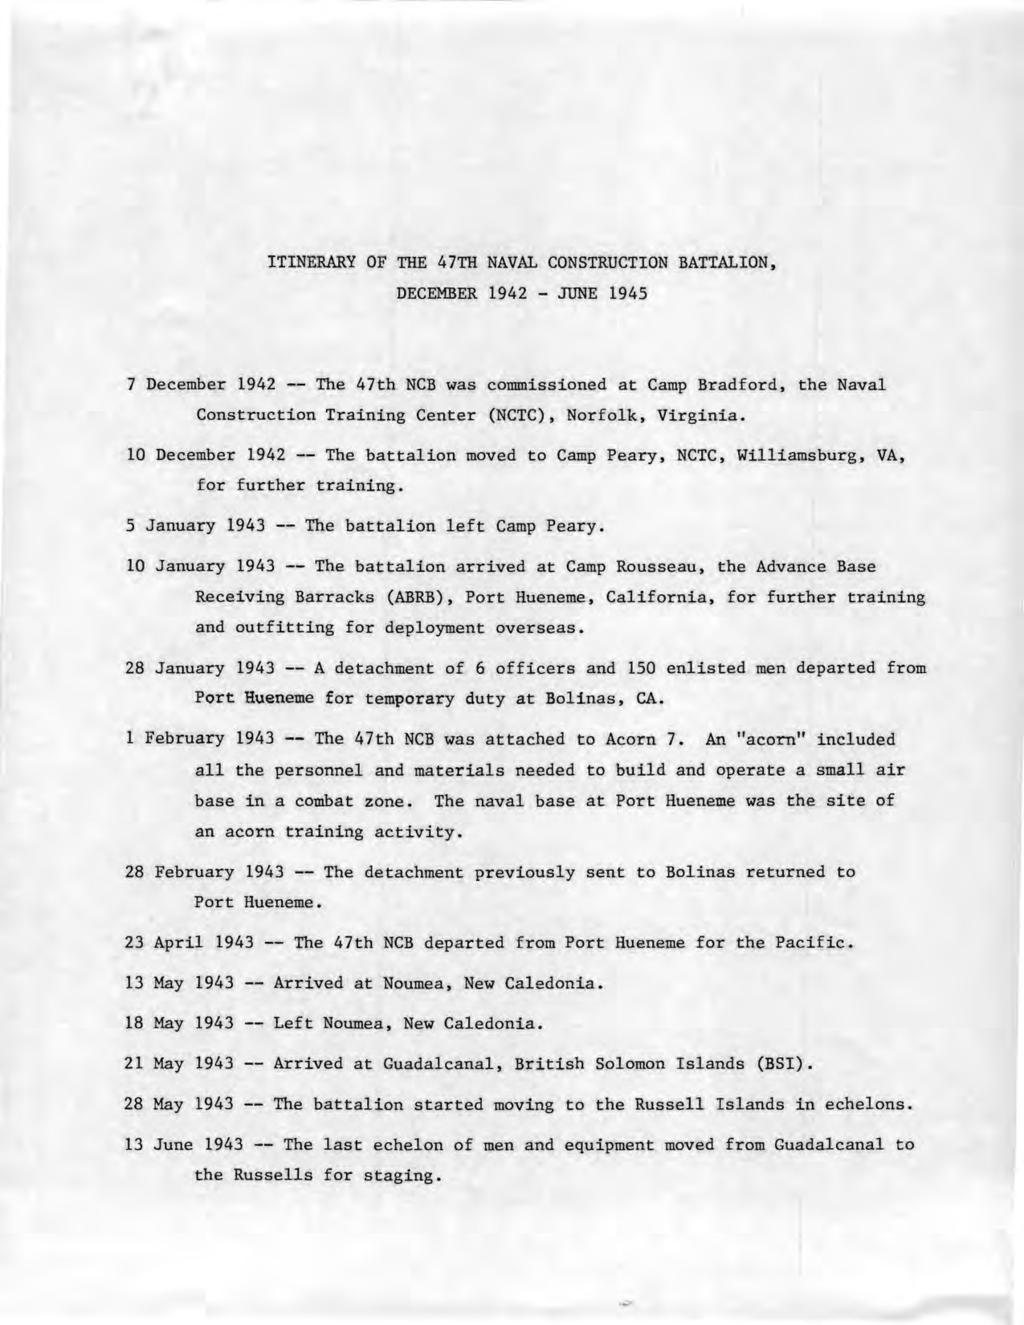 ITINERARY OF THE 47TH NAVAL CONSTRUCTION BATTALION, DECEMBER 1942 - JUNE 1945 7 December 1942 -- The 47th NCB was commissioned at Camp Bradford, the Naval Construction Training Center (NCTC),